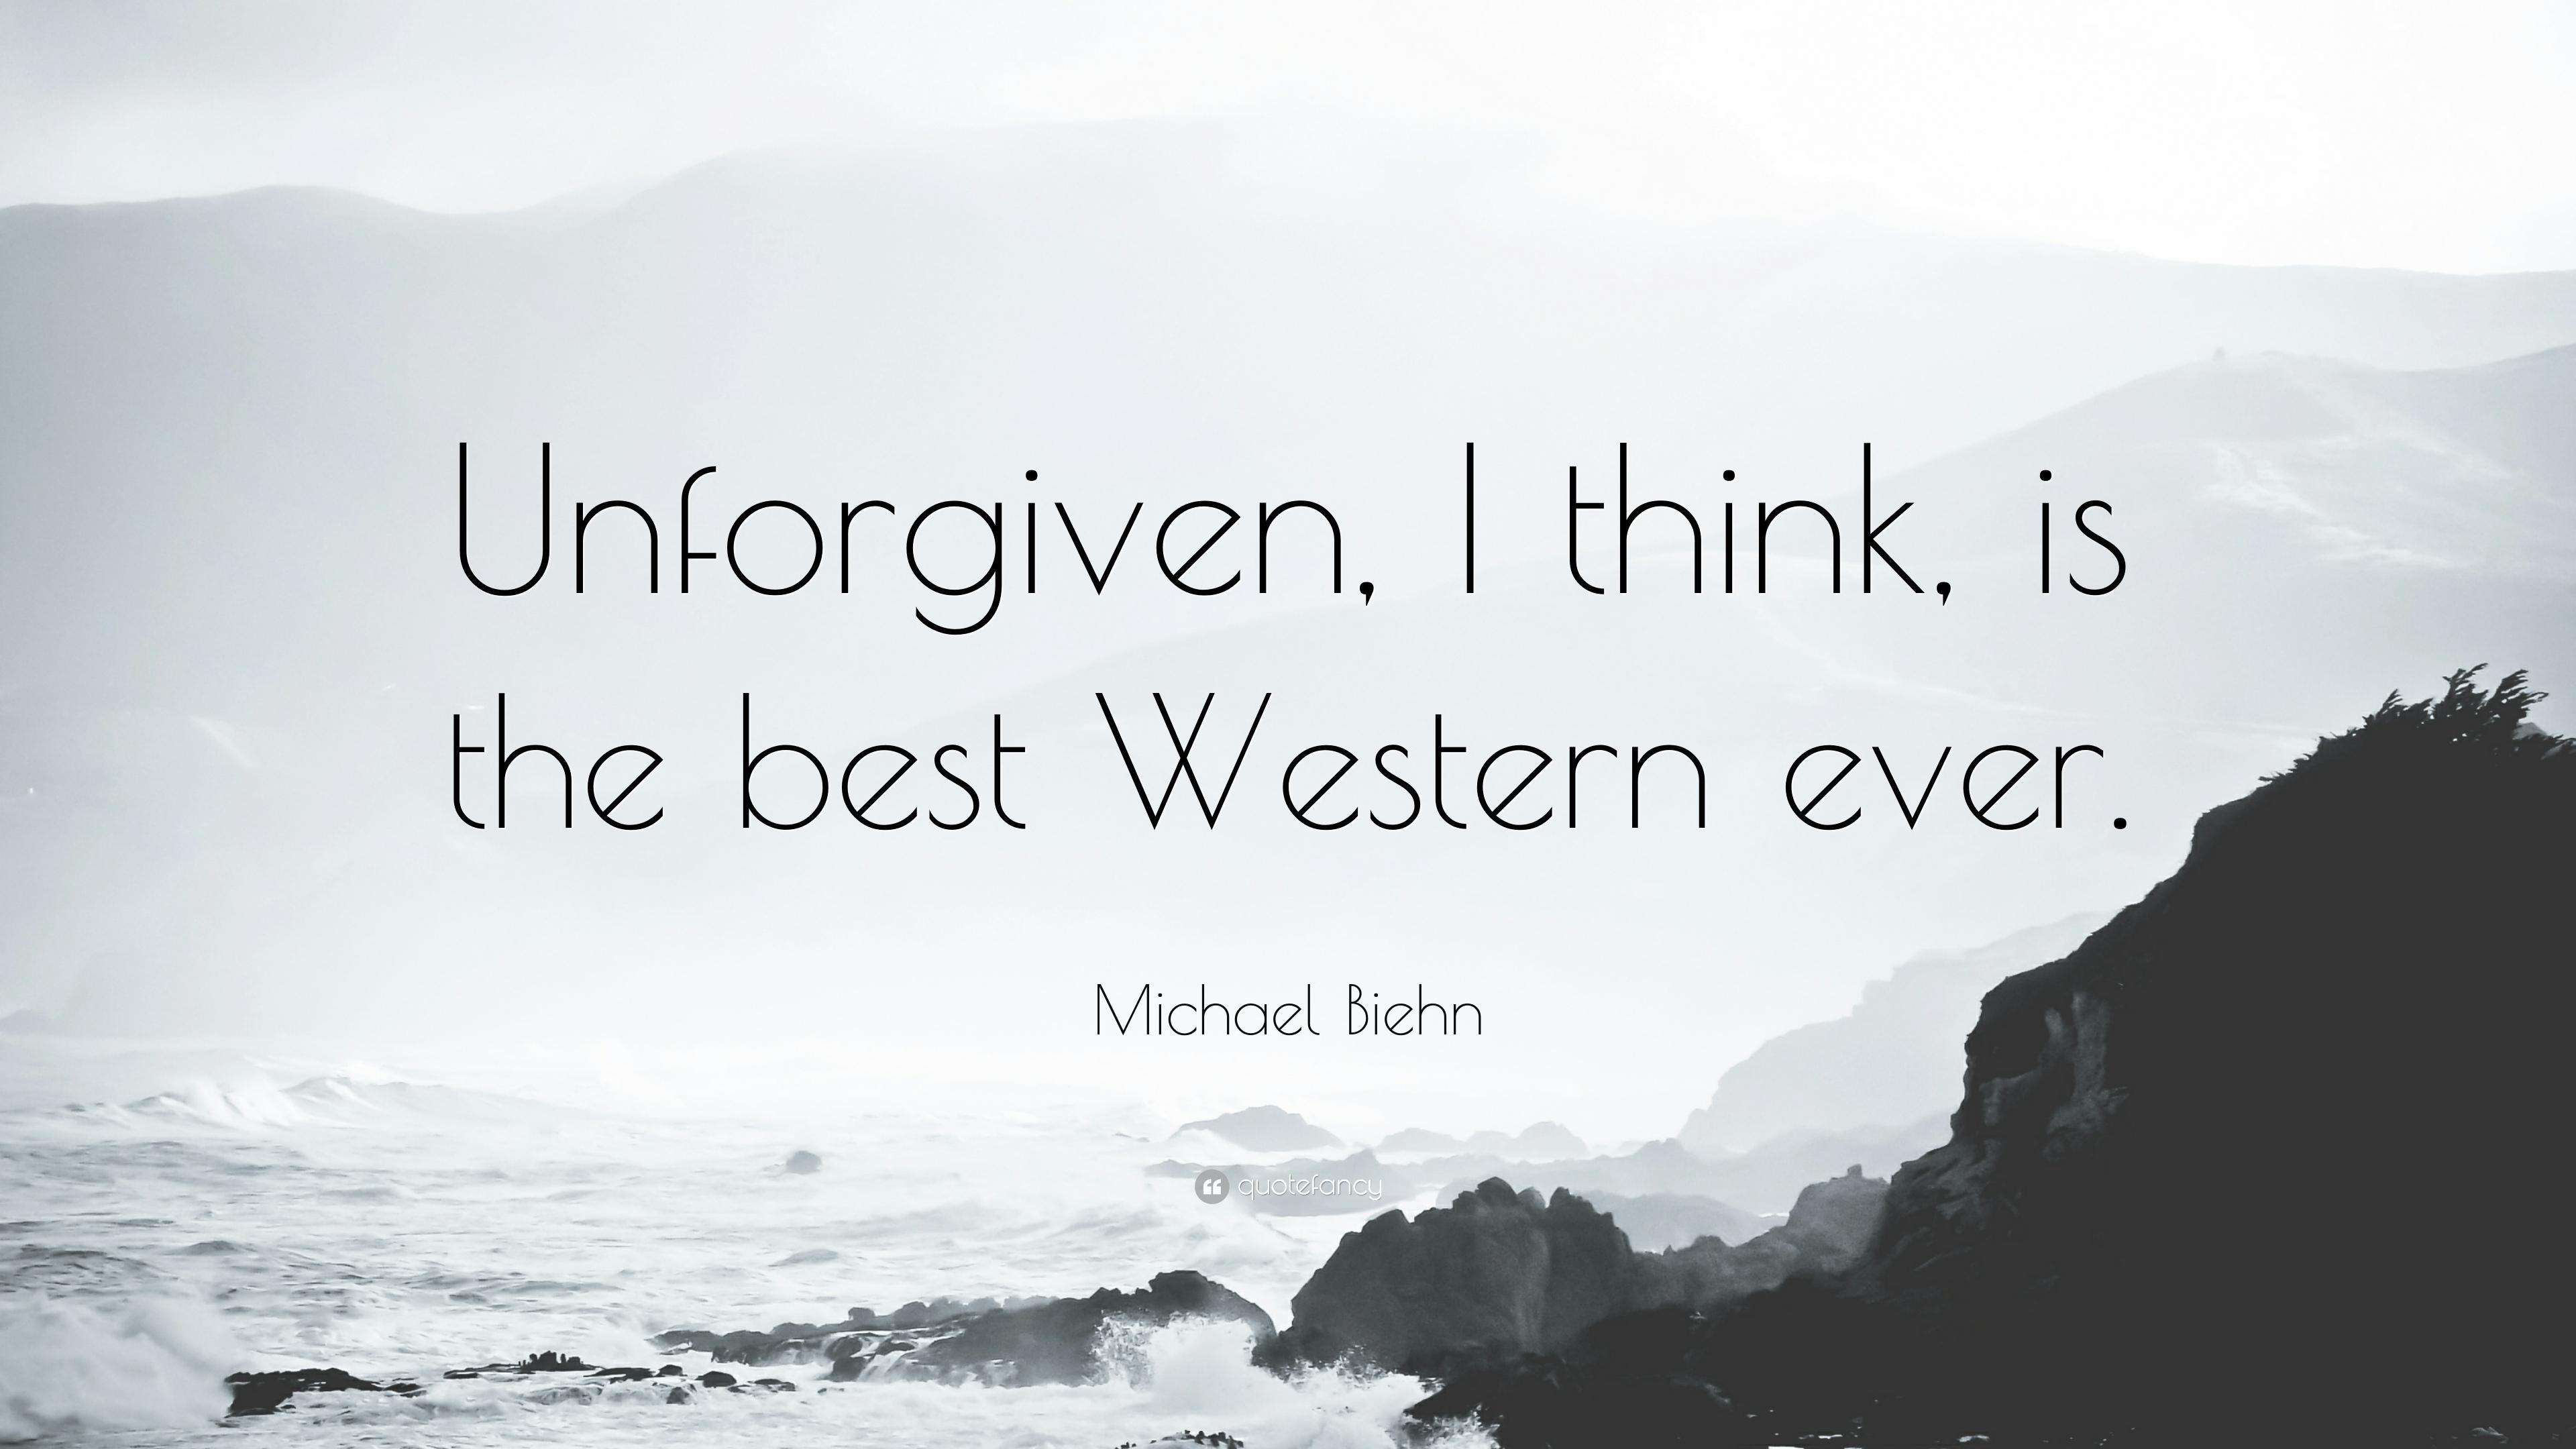 Michael Biehn Quote: “Unforgiven, I think, is the best Western ever